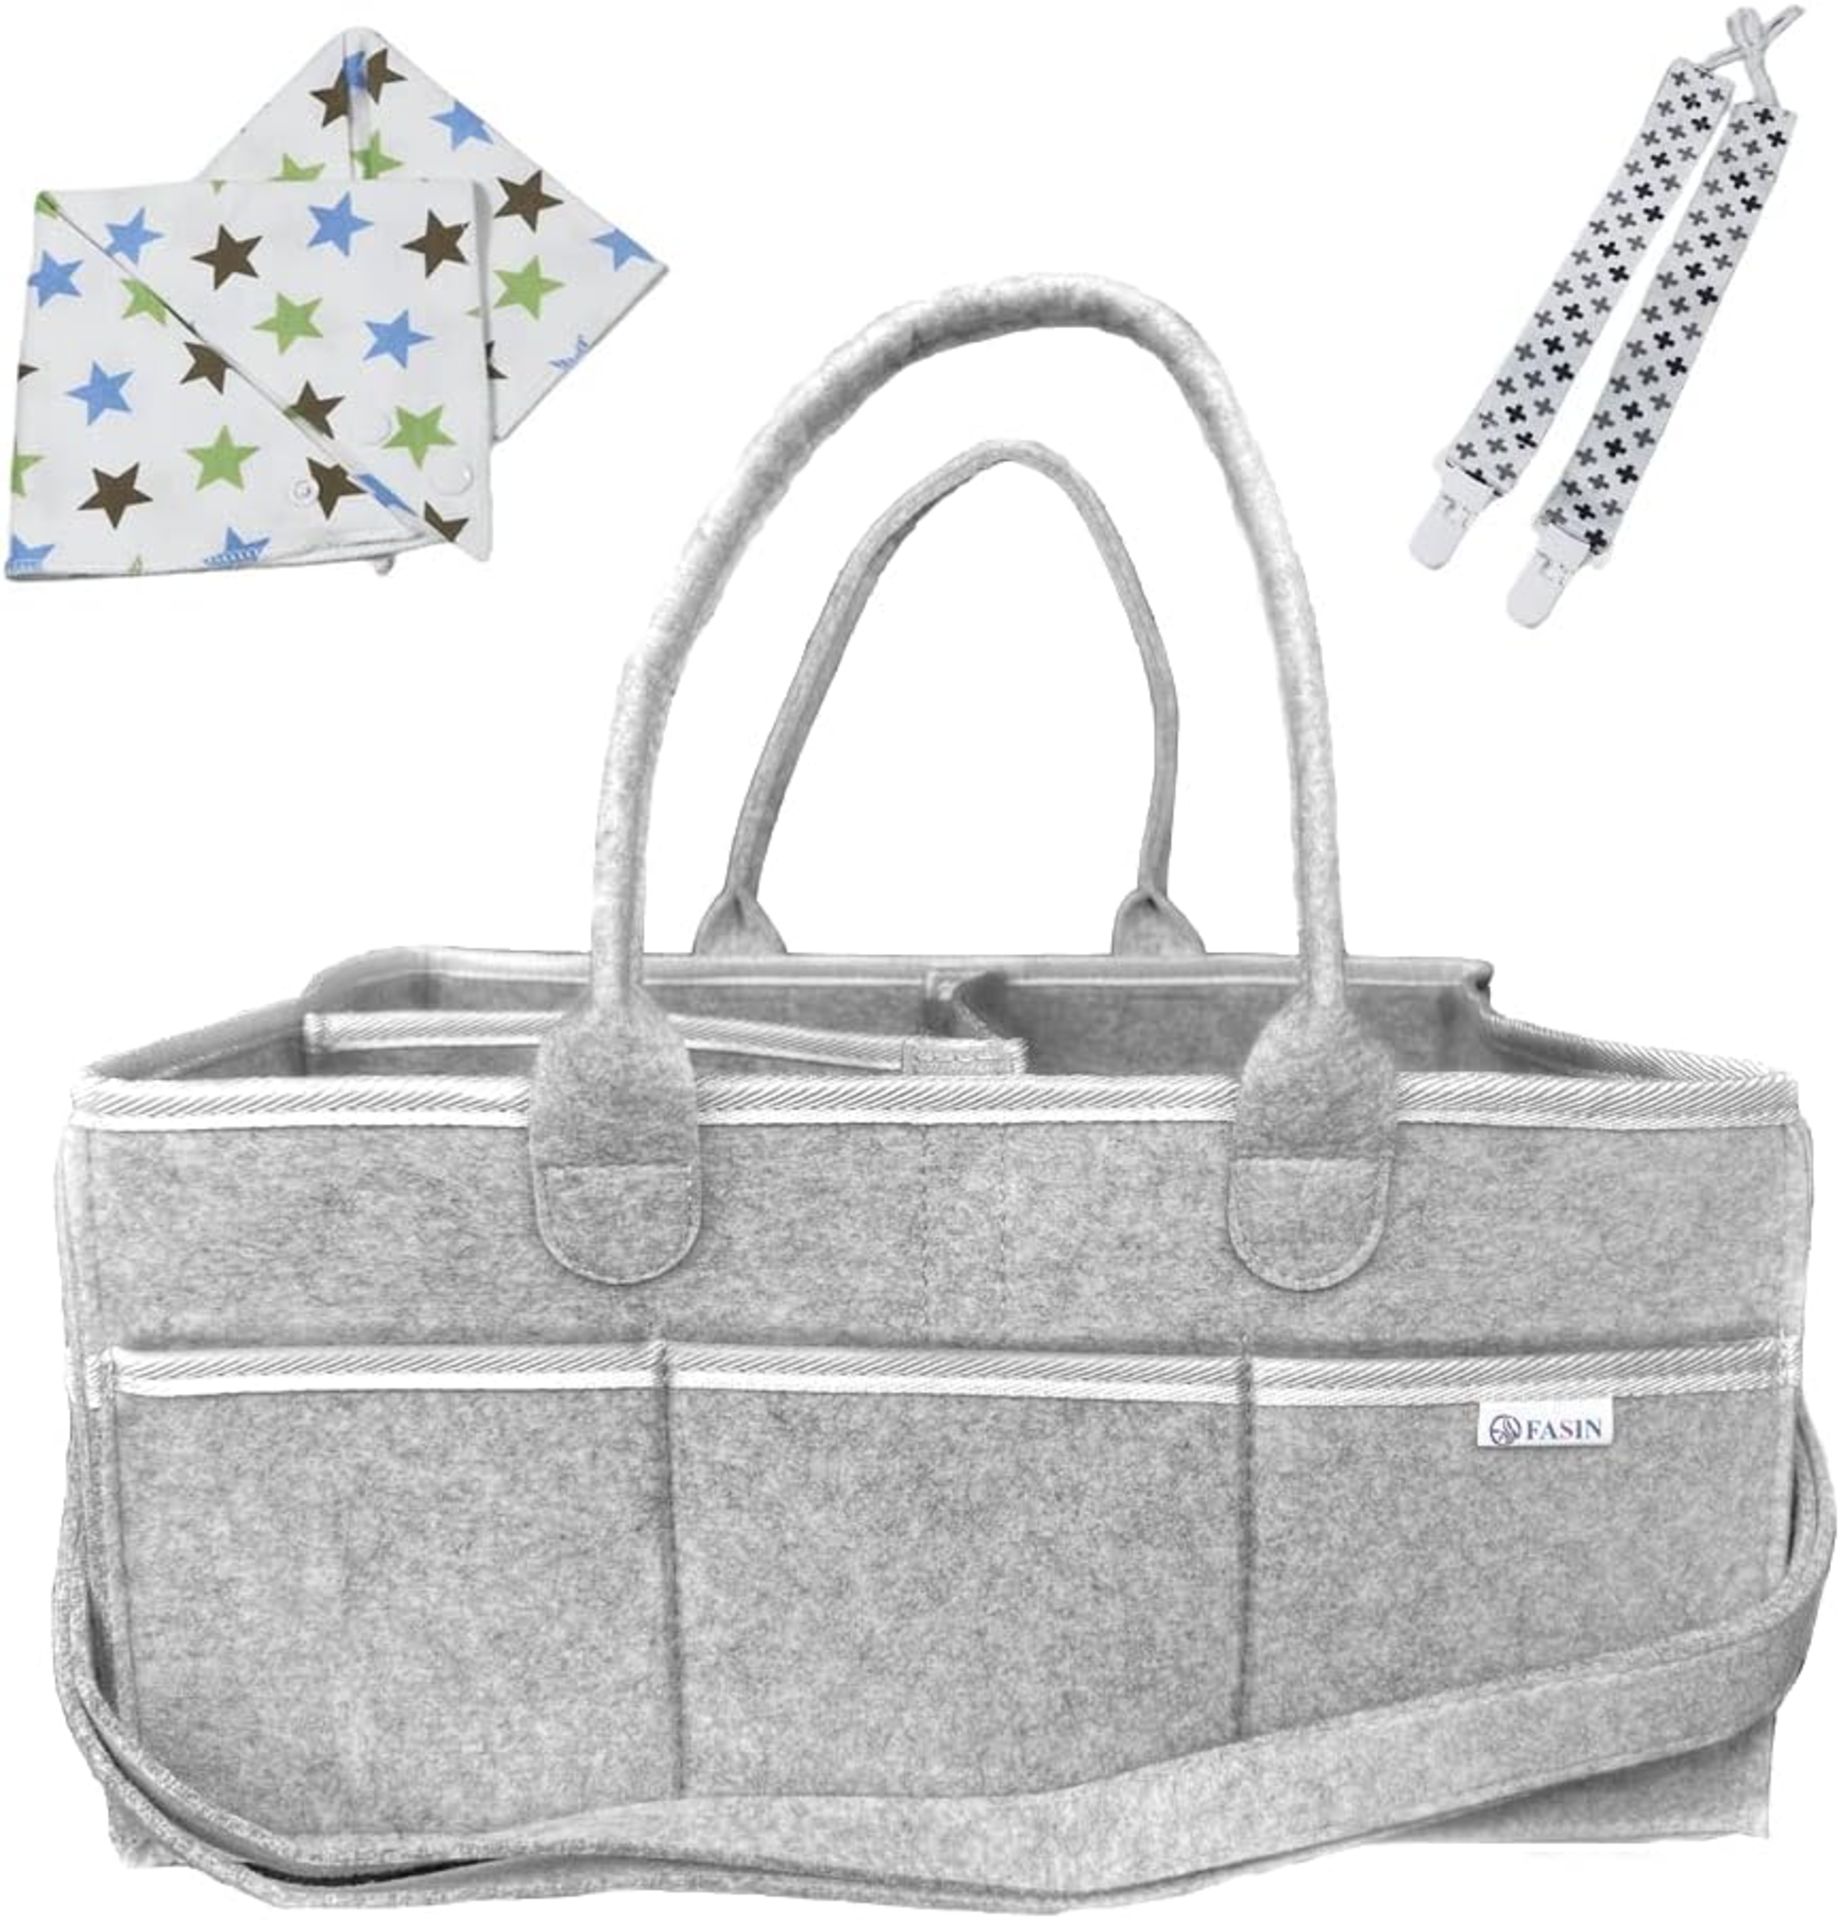 Baby Nappy Caddy Organiser With 2 Baby Bibs & Pacifier Clips - Image 8 of 8